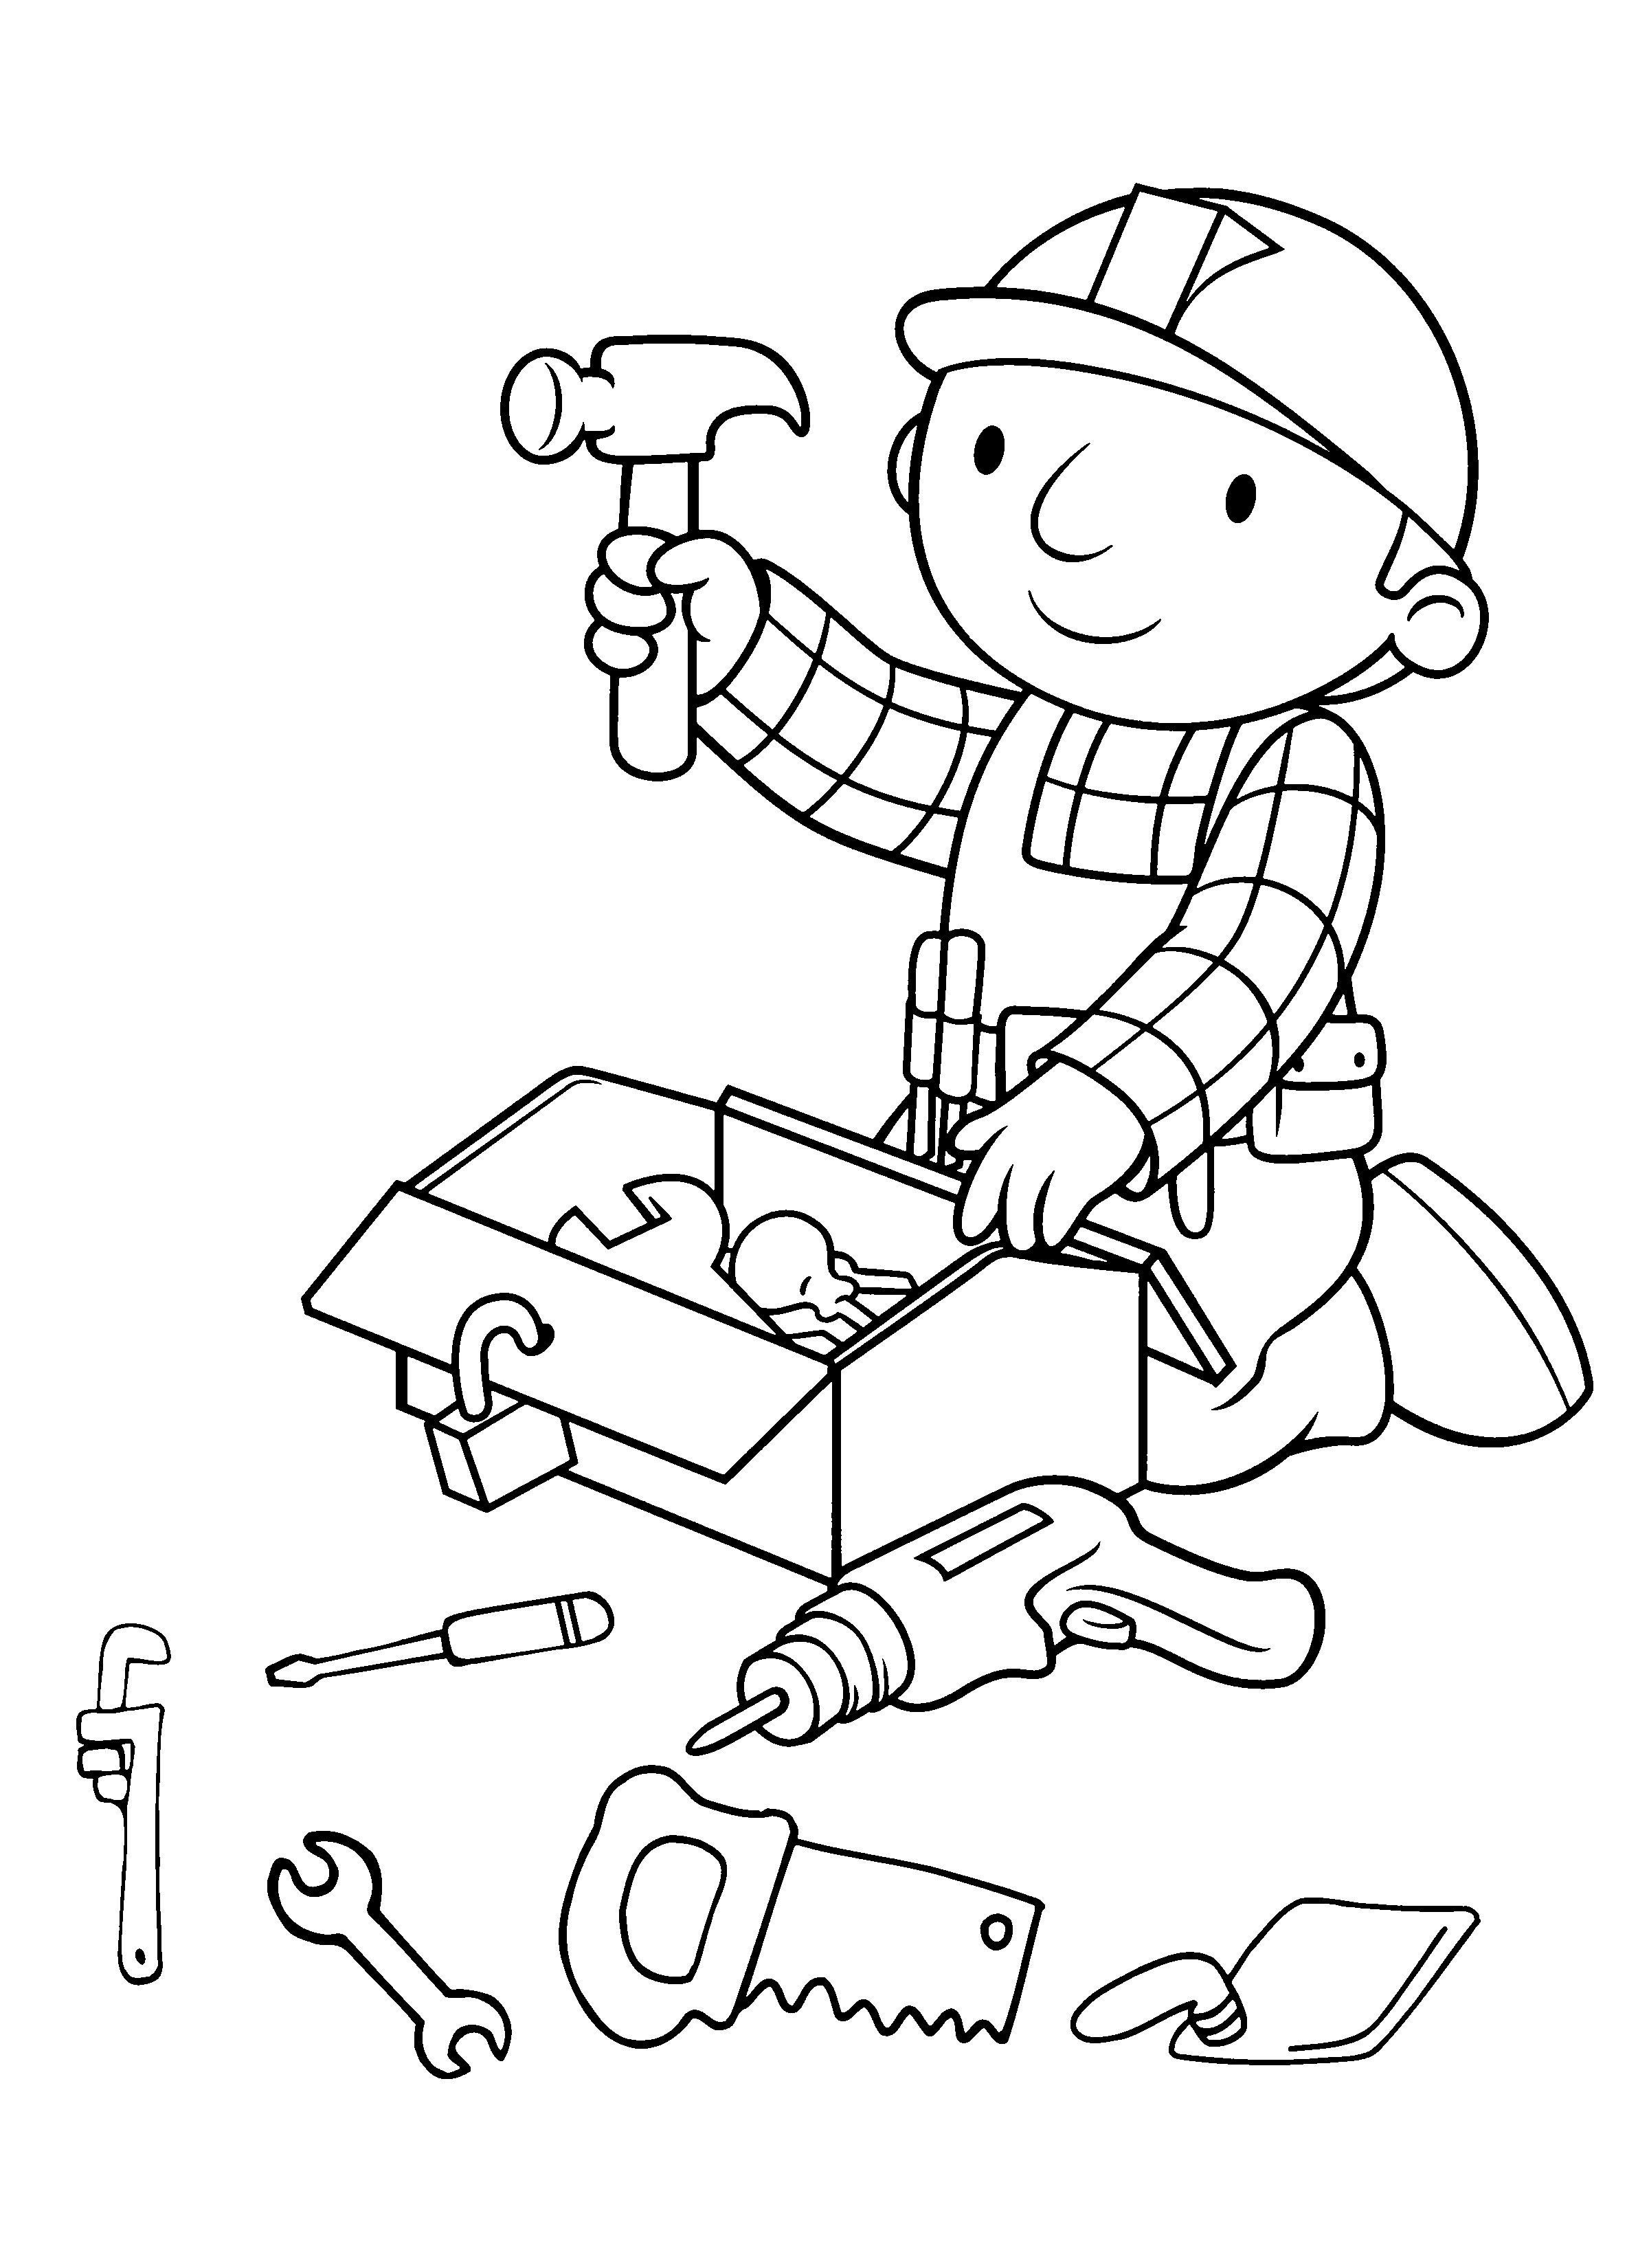 free-printable-bob-the-builder-coloring-pages-for-kids